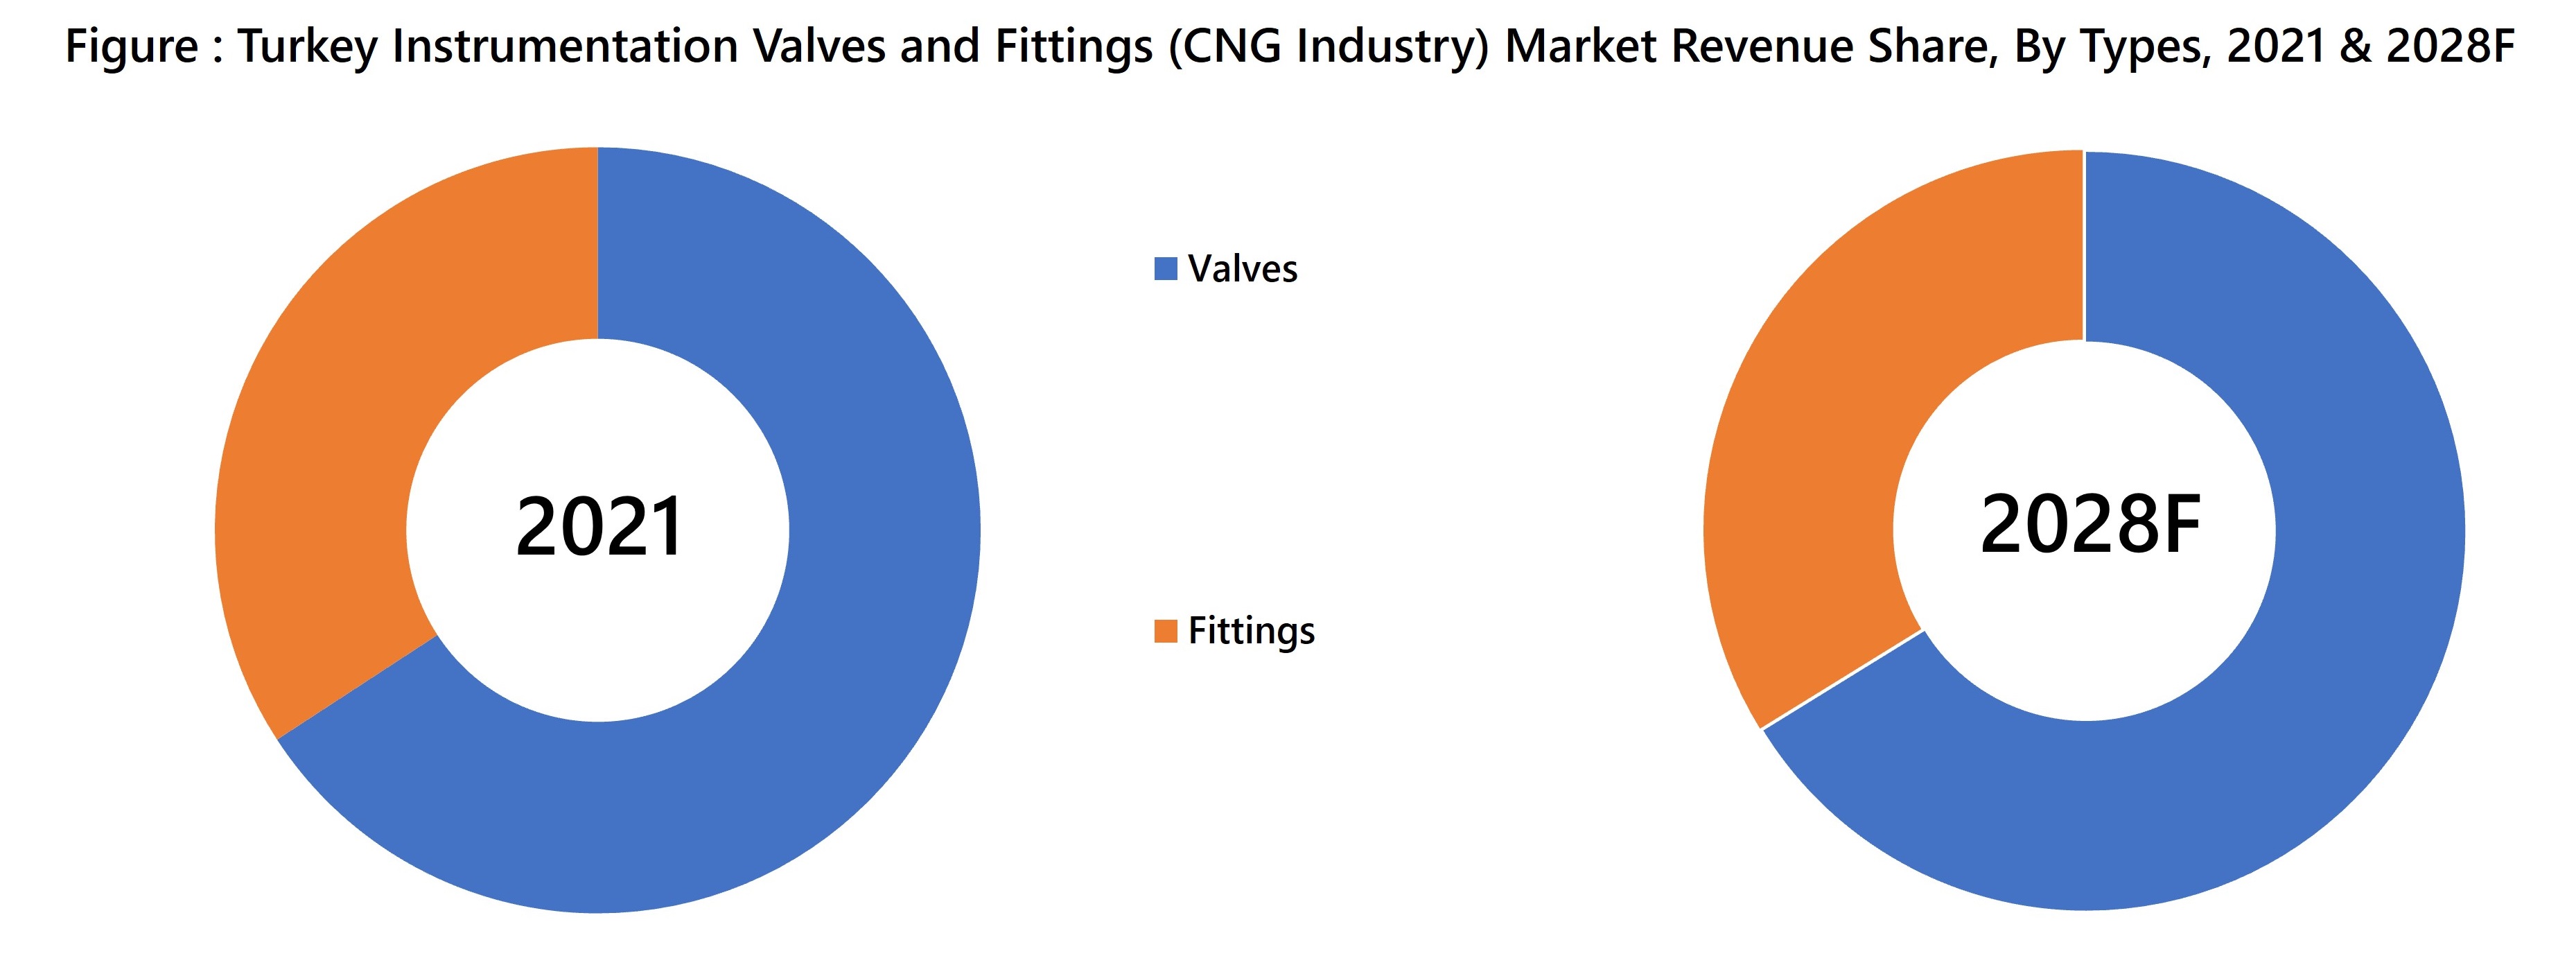 Turkey Instrumentation Valves and Fittings (CNG Industry) Market Revenue Share